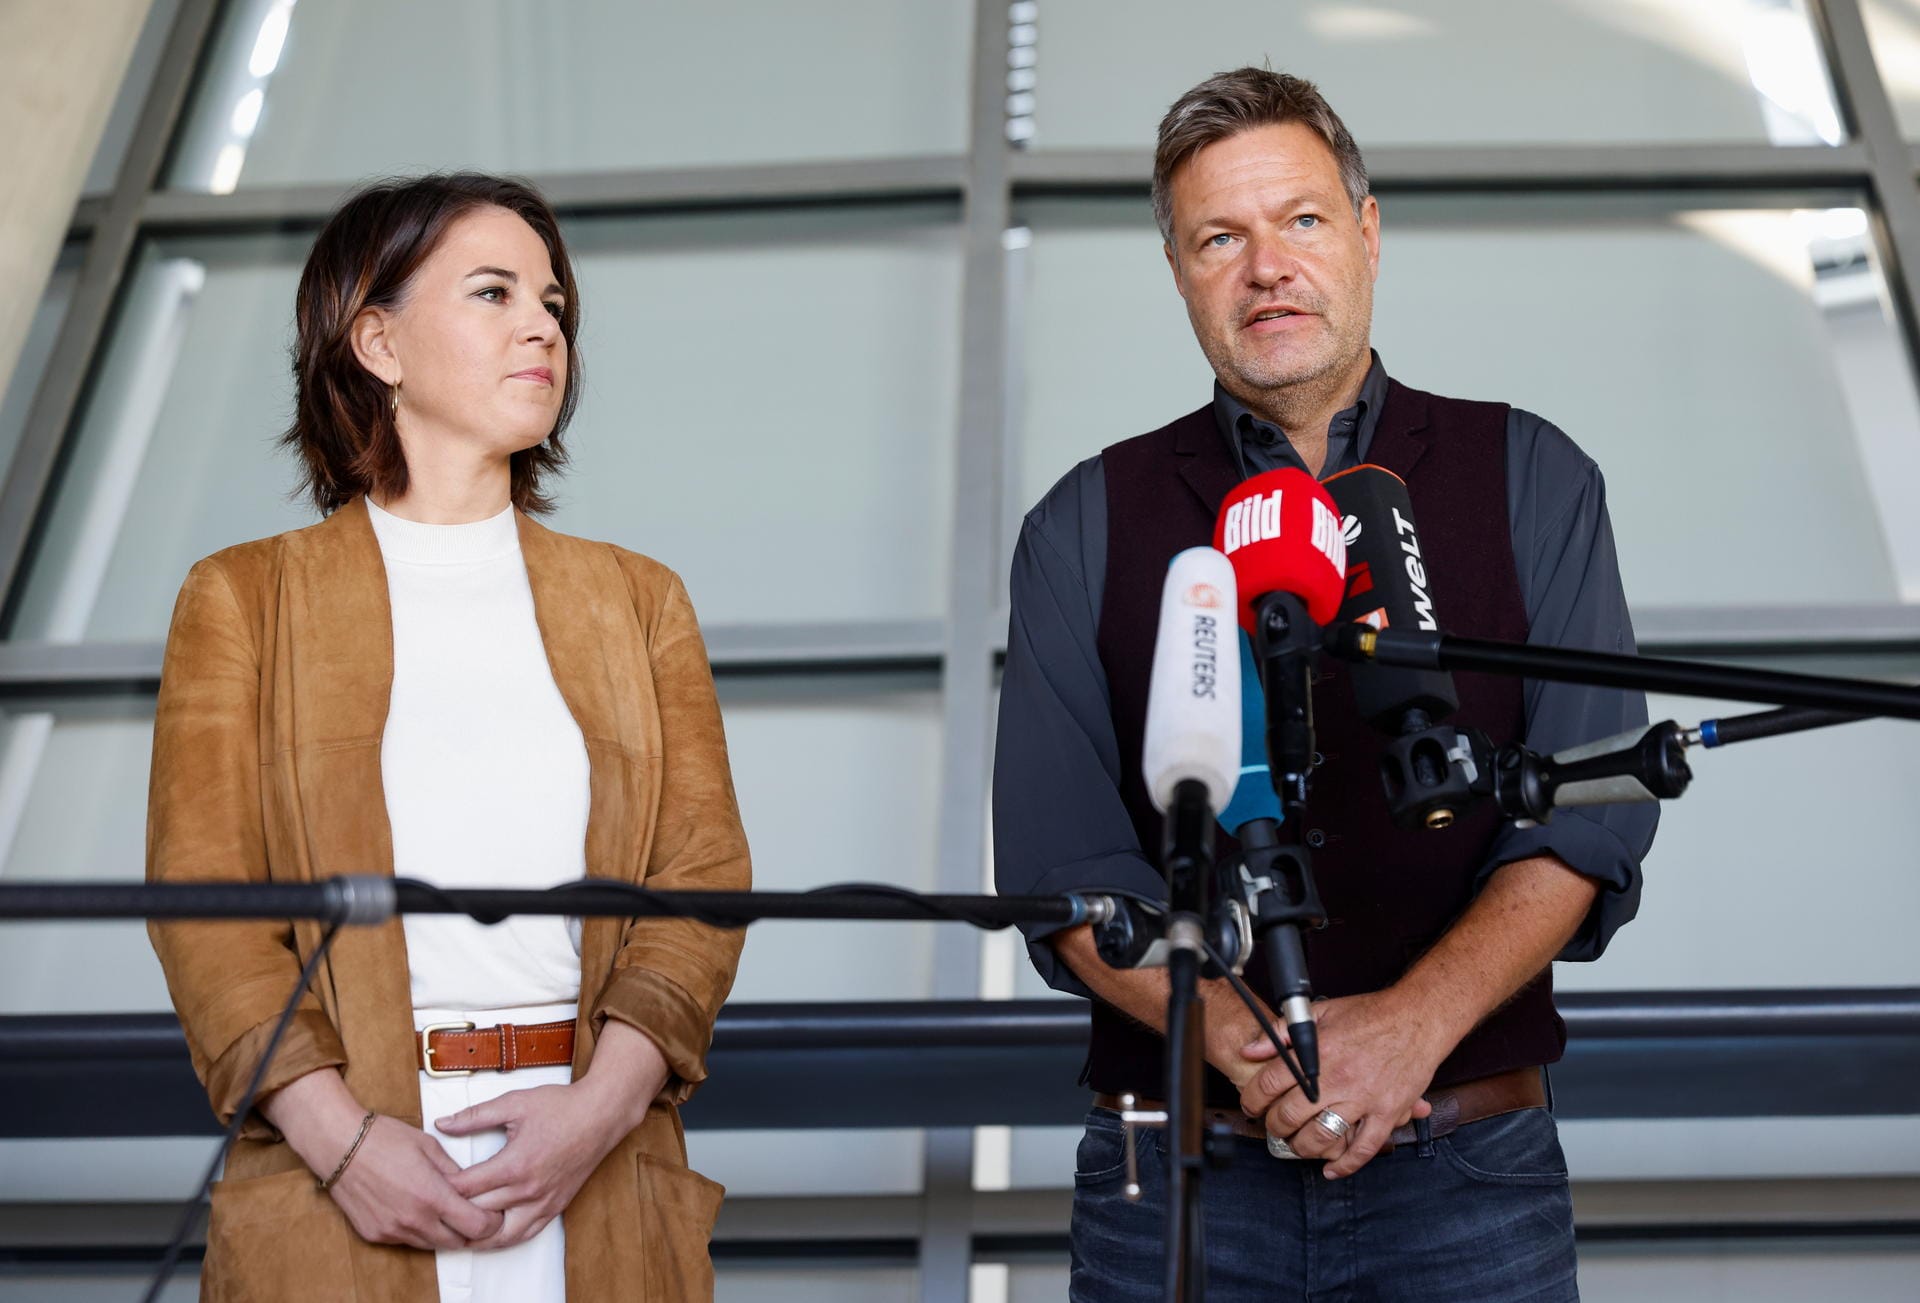 Greens party co-leaders Baerbock and Habeck give a statement, in Berlin